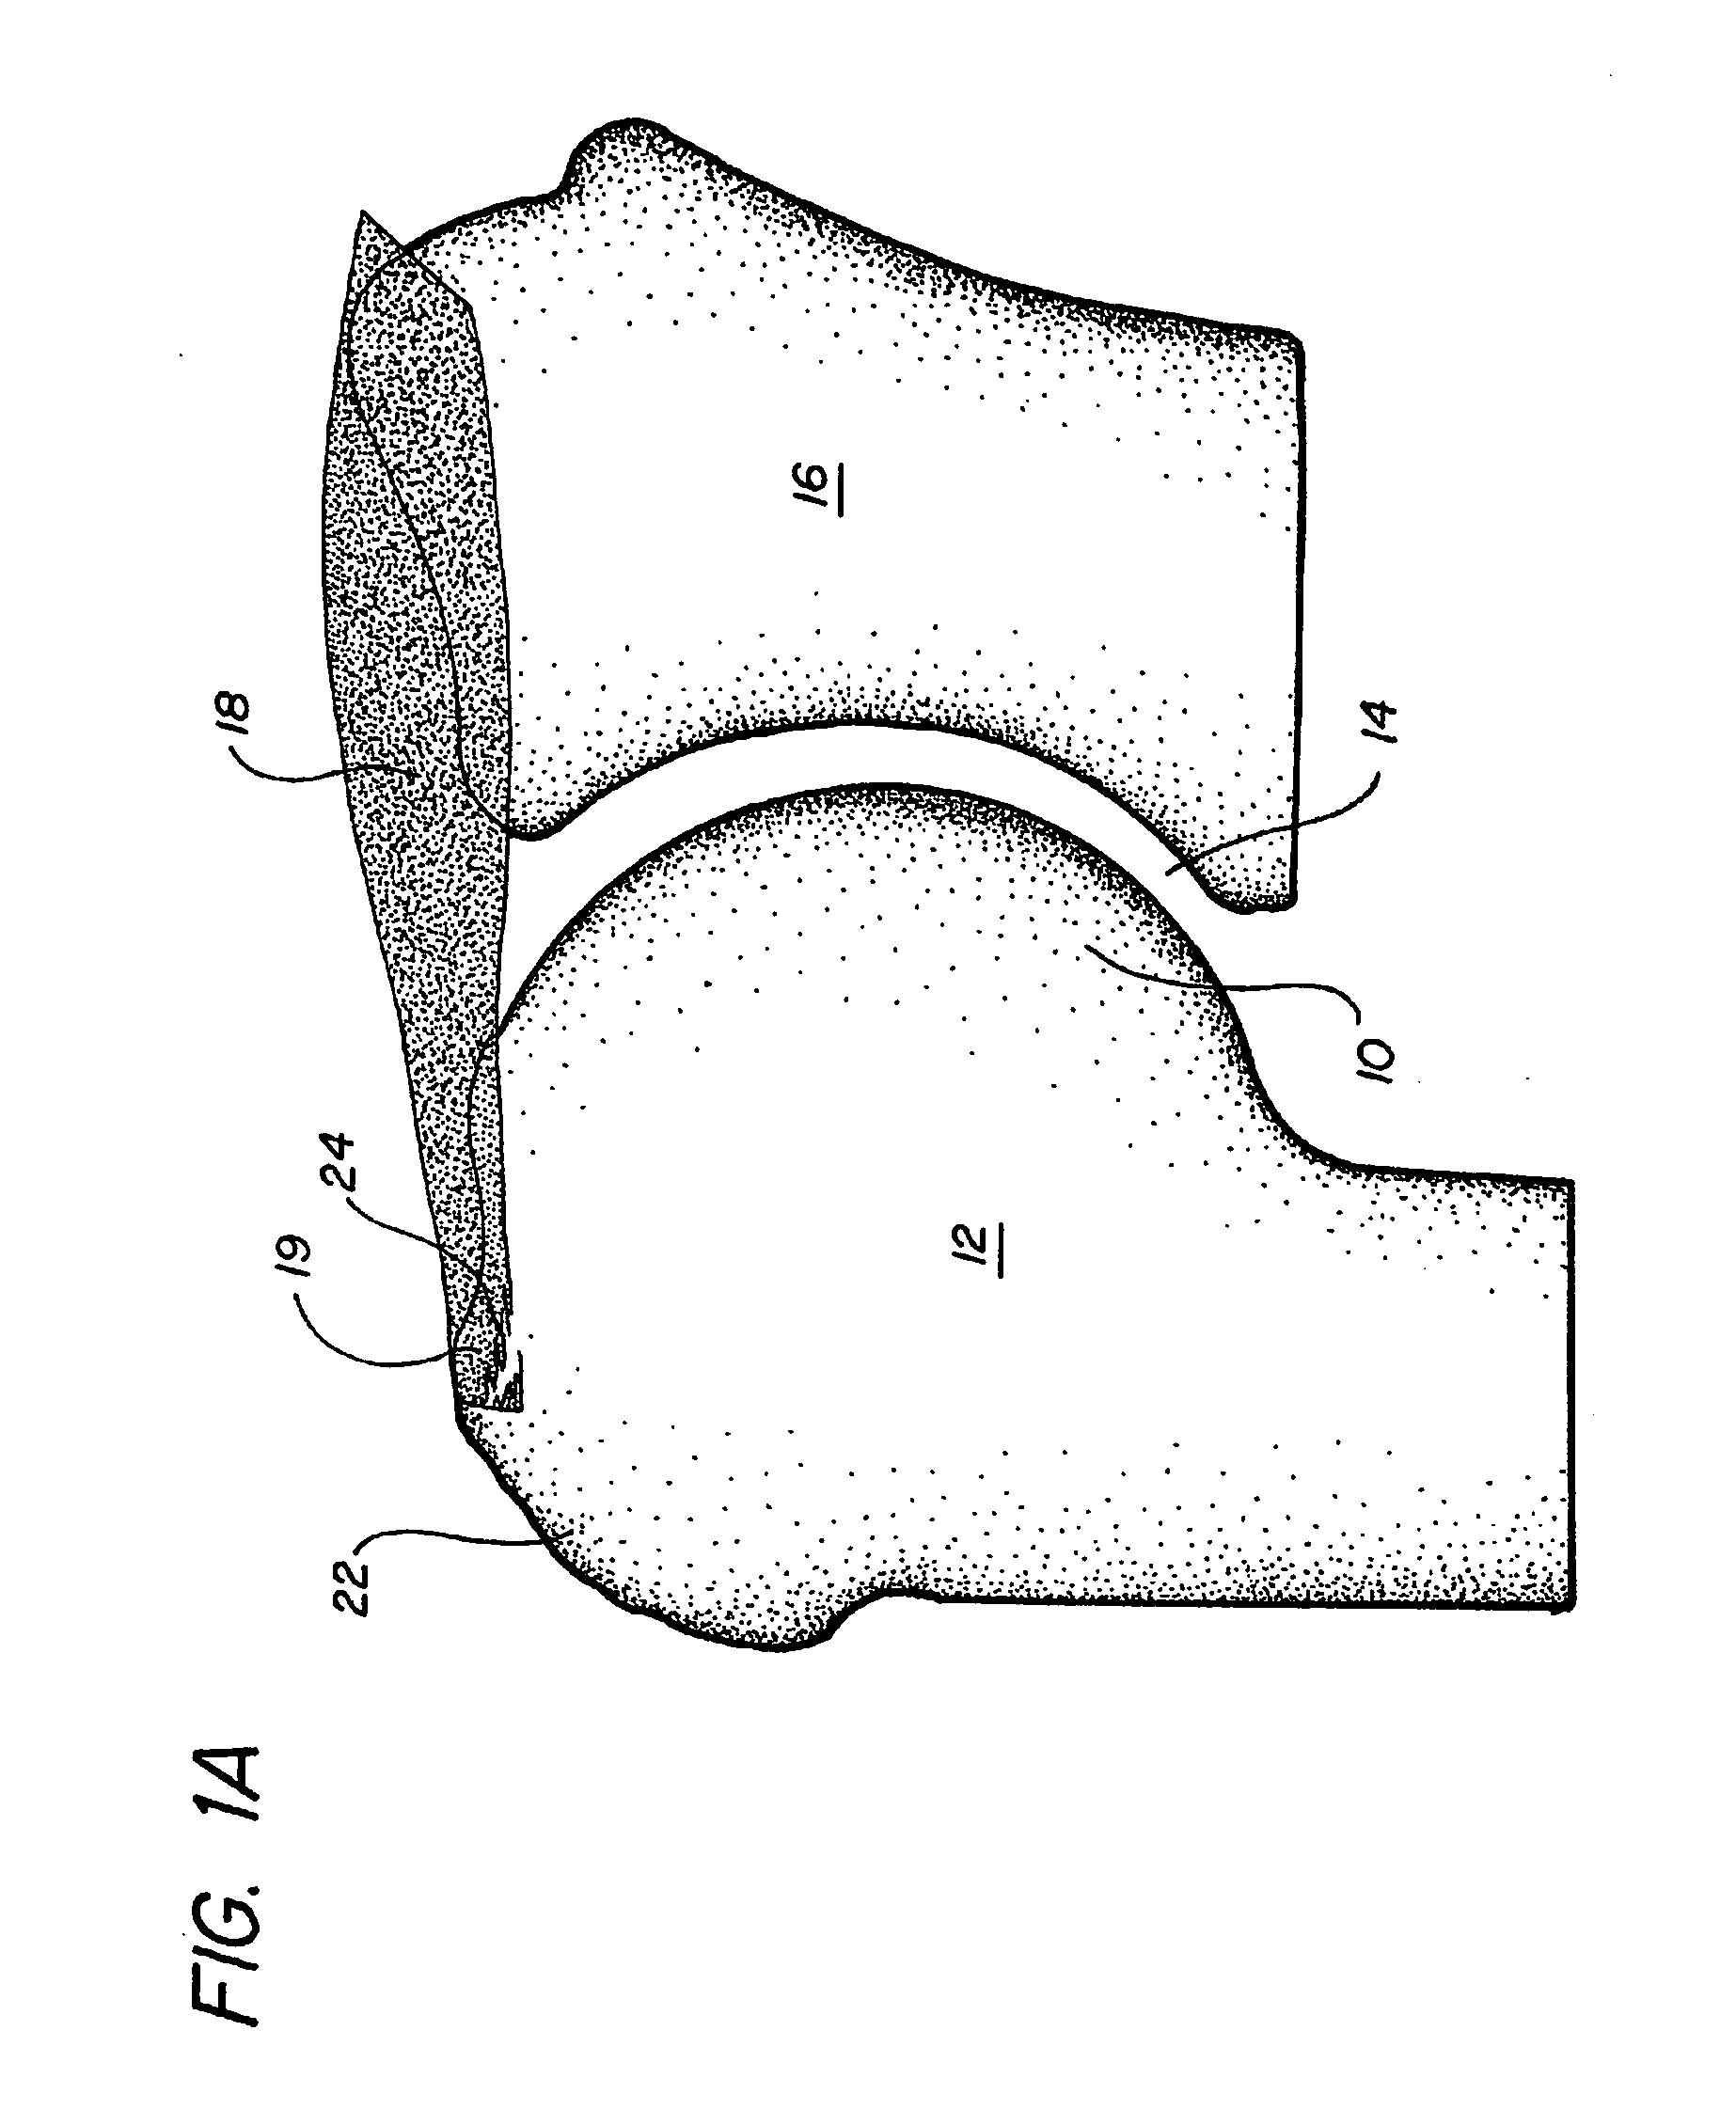 Methods and apparatus for preventing migration of sutures through transosseous tunnels